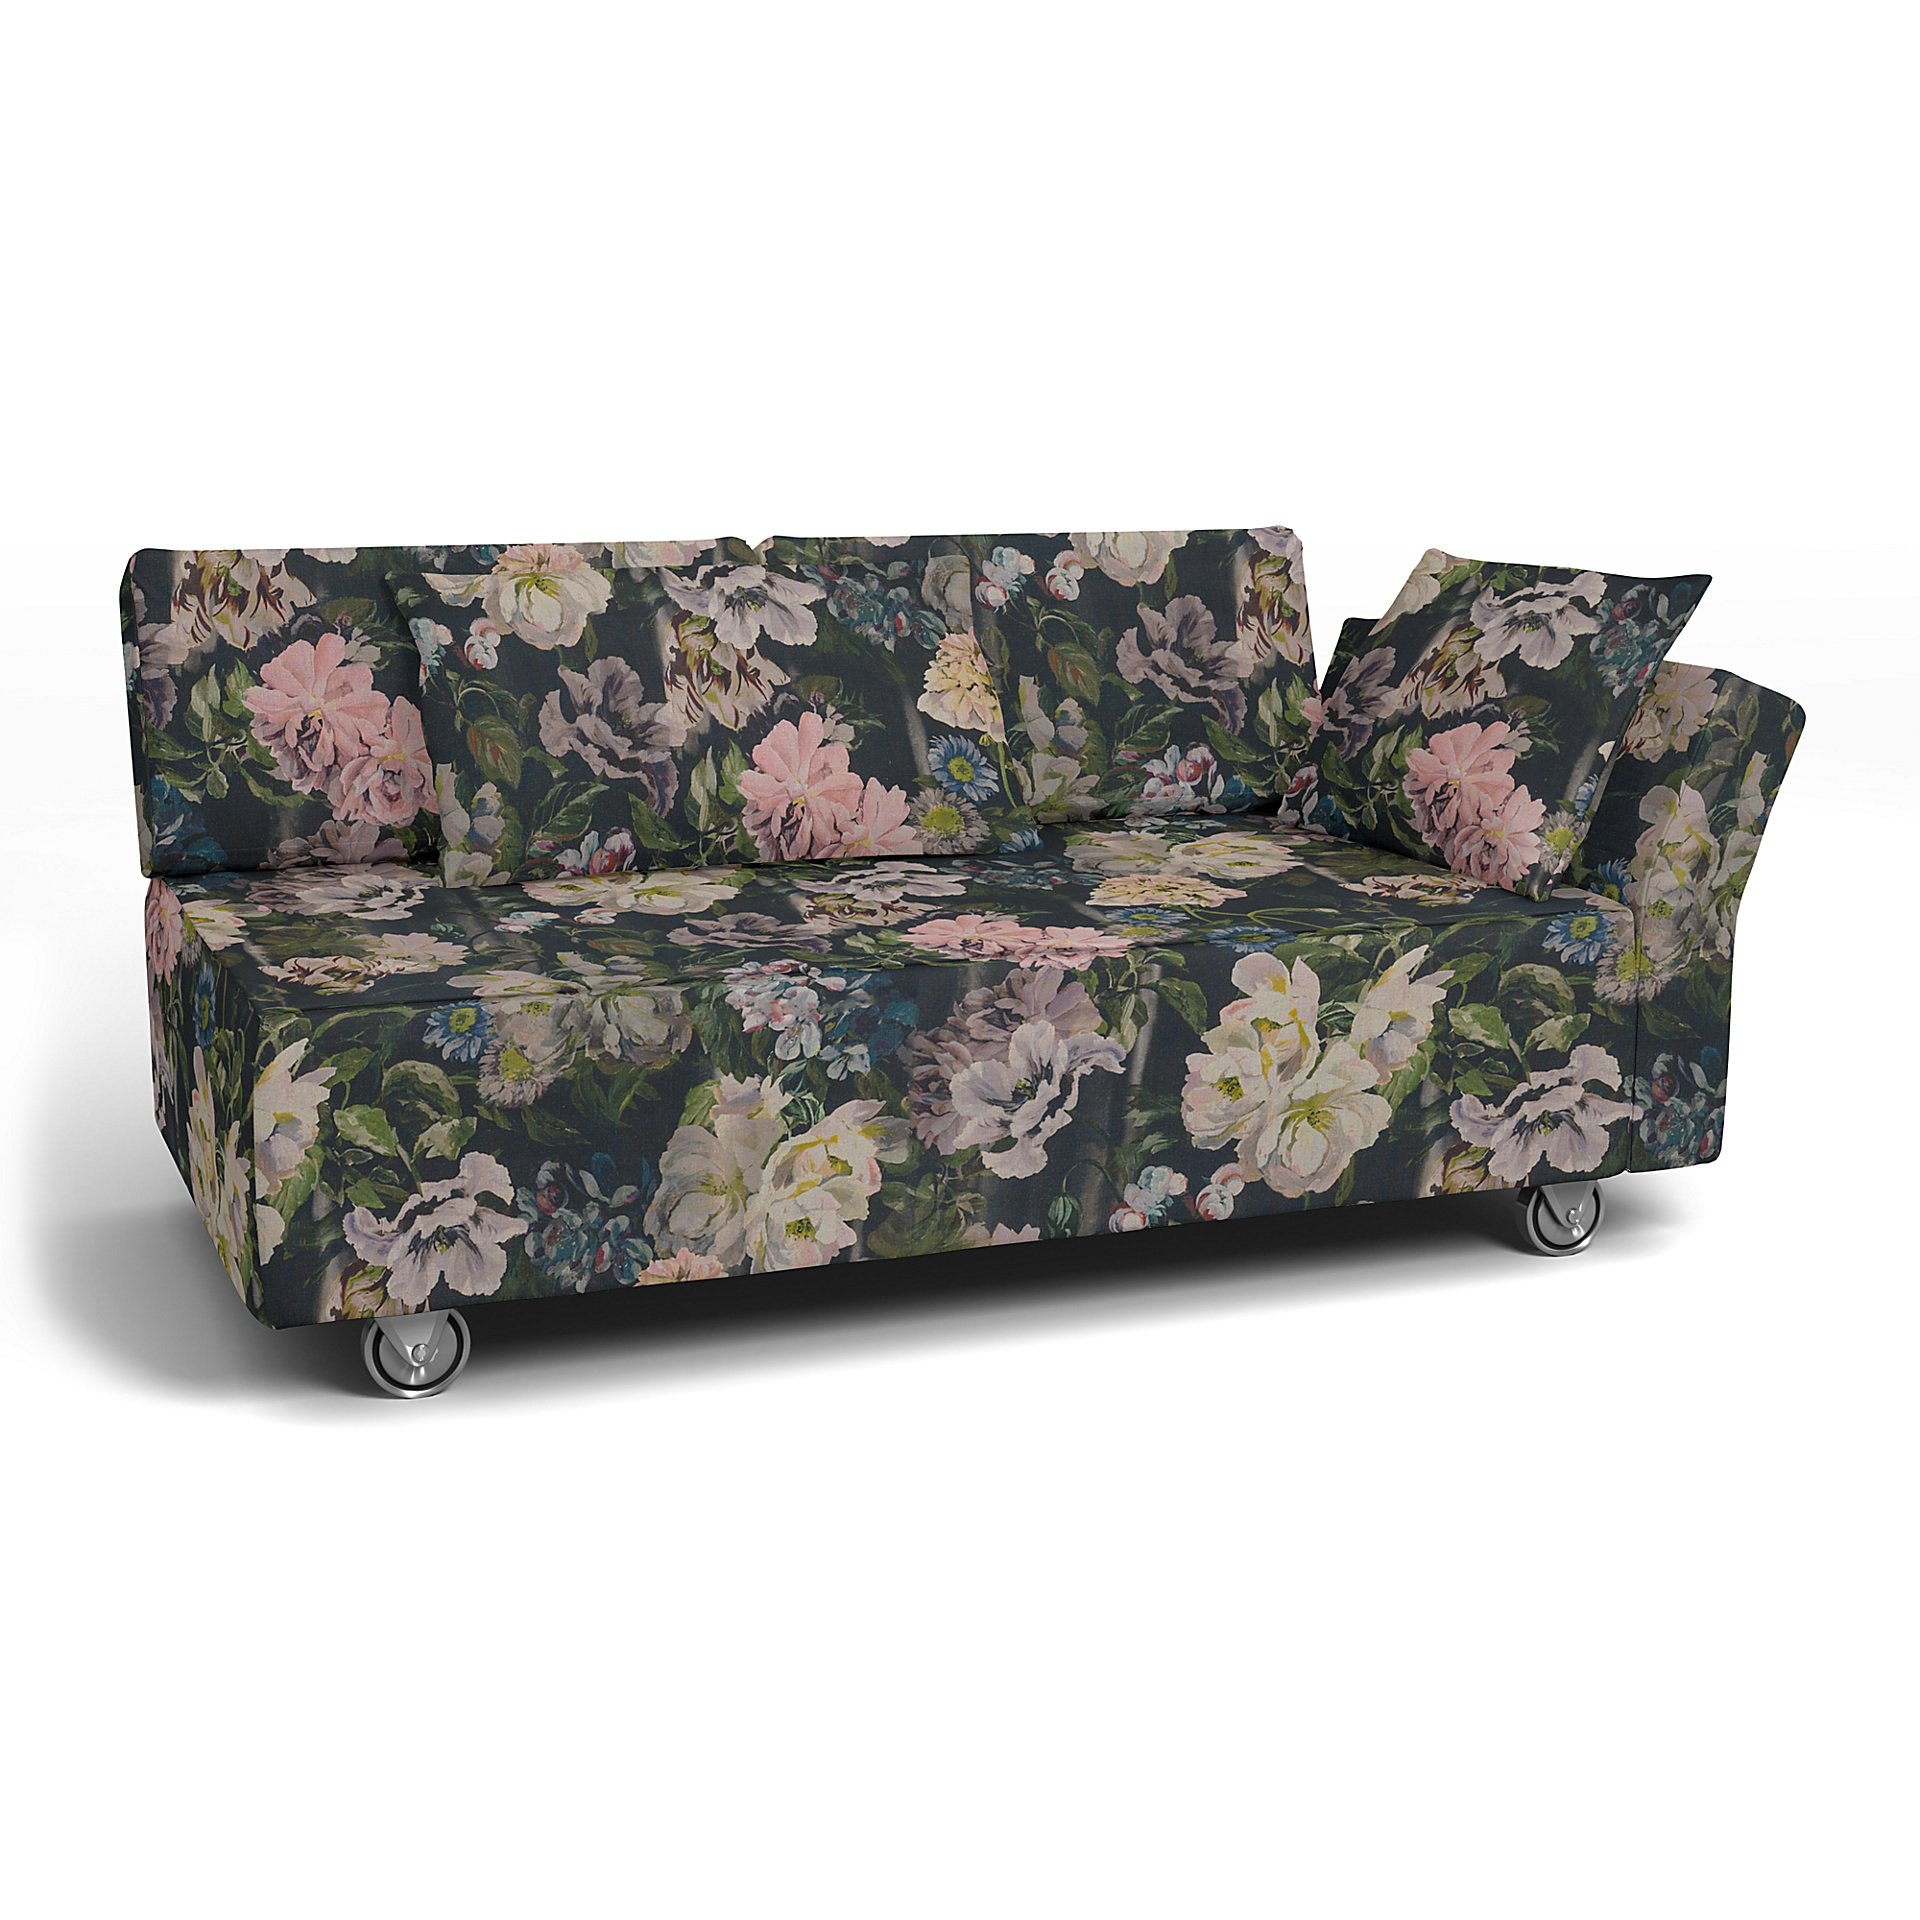 IKEA - Falsterbo 2 Seat Sofa with Right Arm Cover, Delft Flower - Graphite, Linen - Bemz